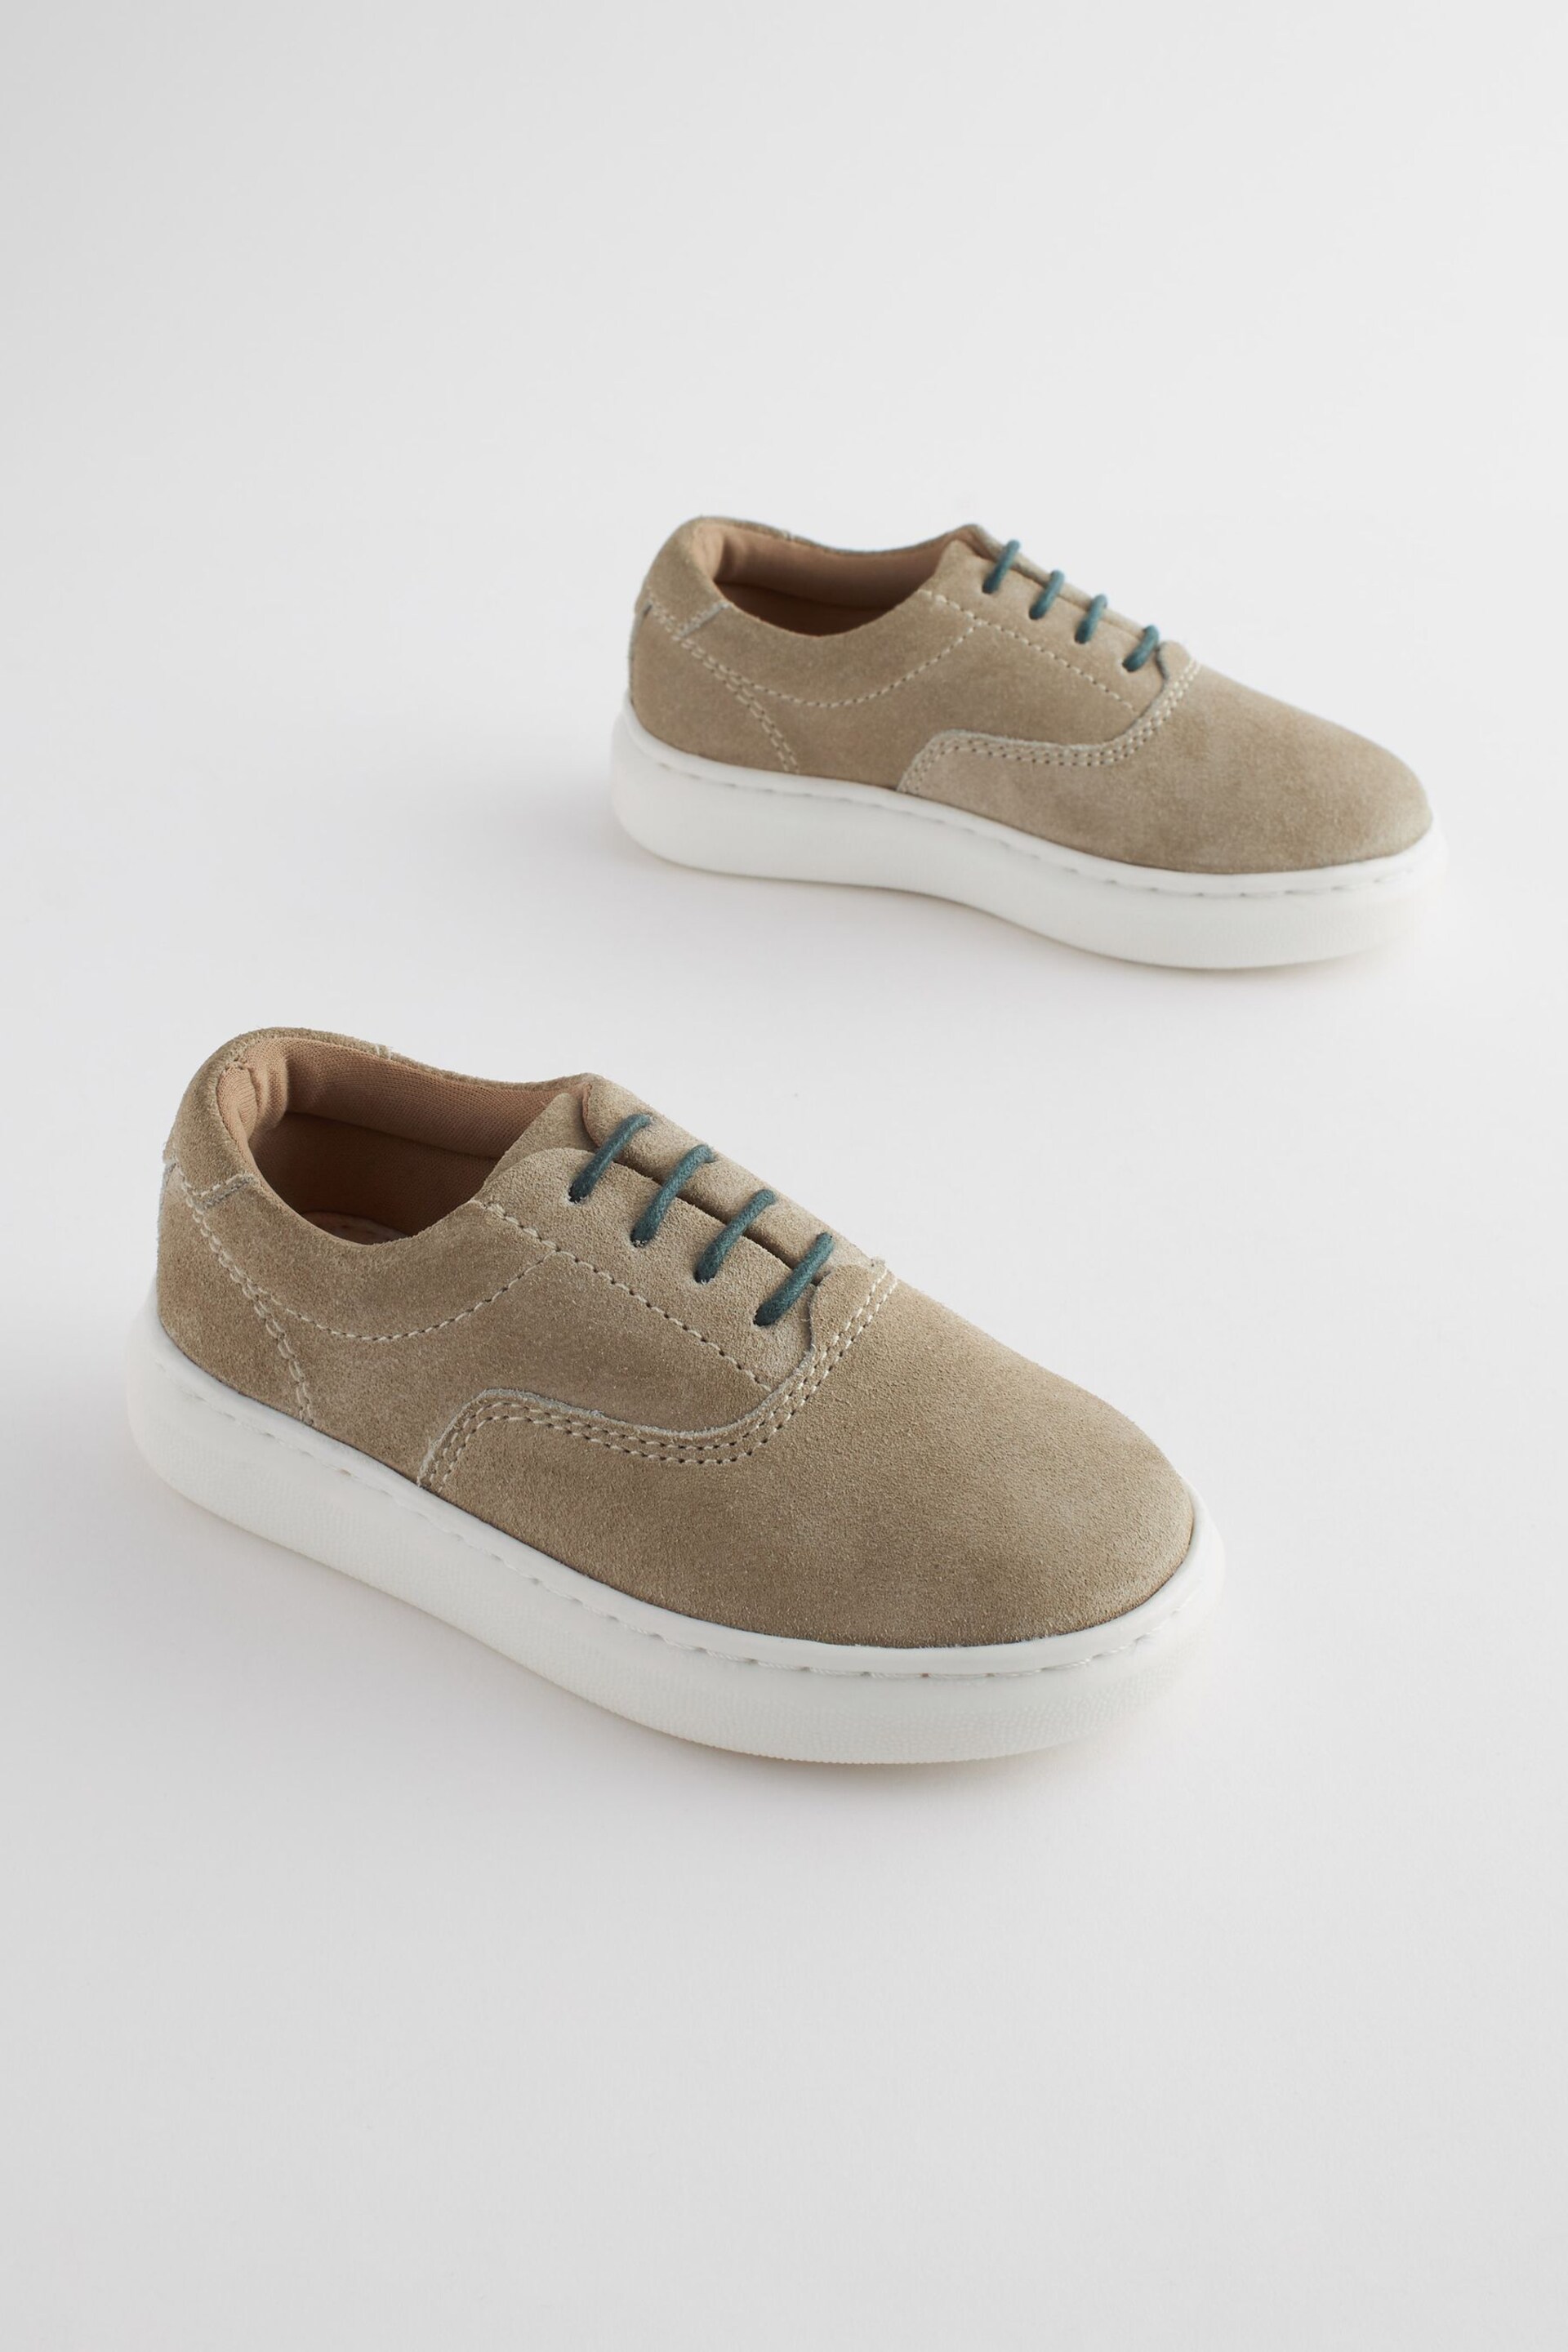 Neutral Stone Smart Leather Lace-Up Shoes - Image 1 of 8